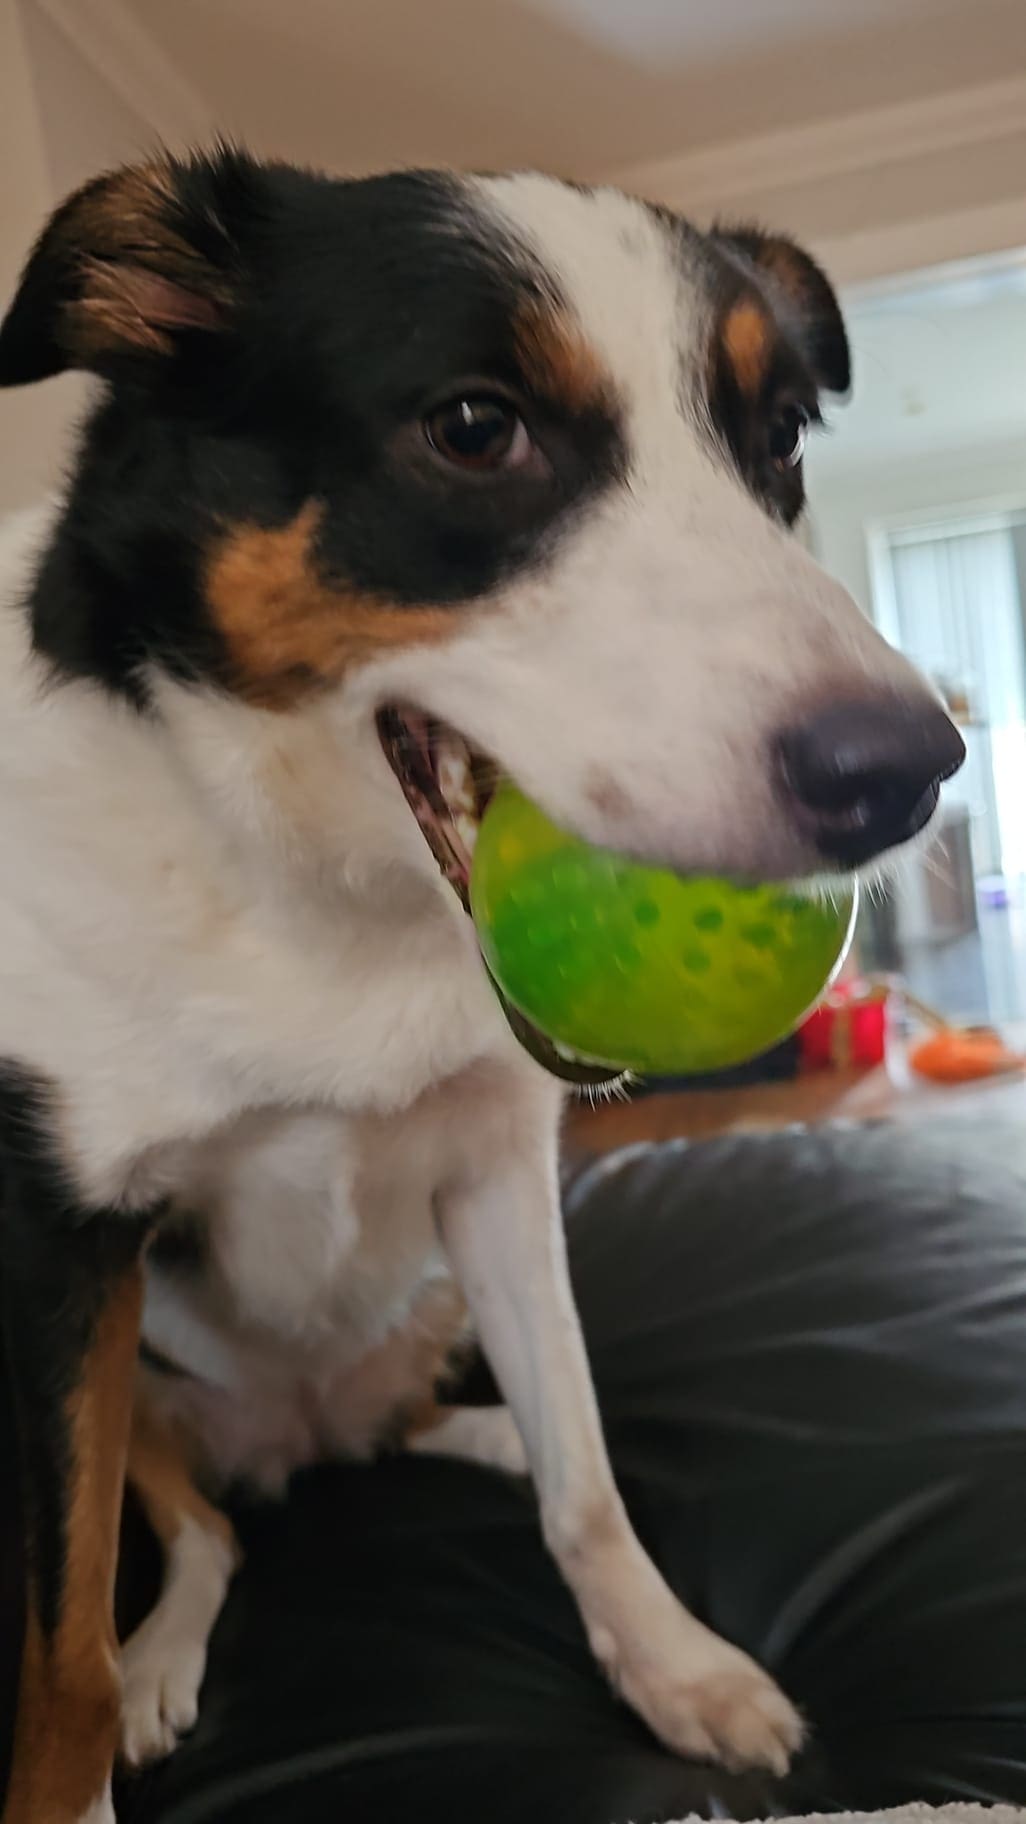 Border collie on a couch appearing to be smiling giving side eye with a green ball in her mouth